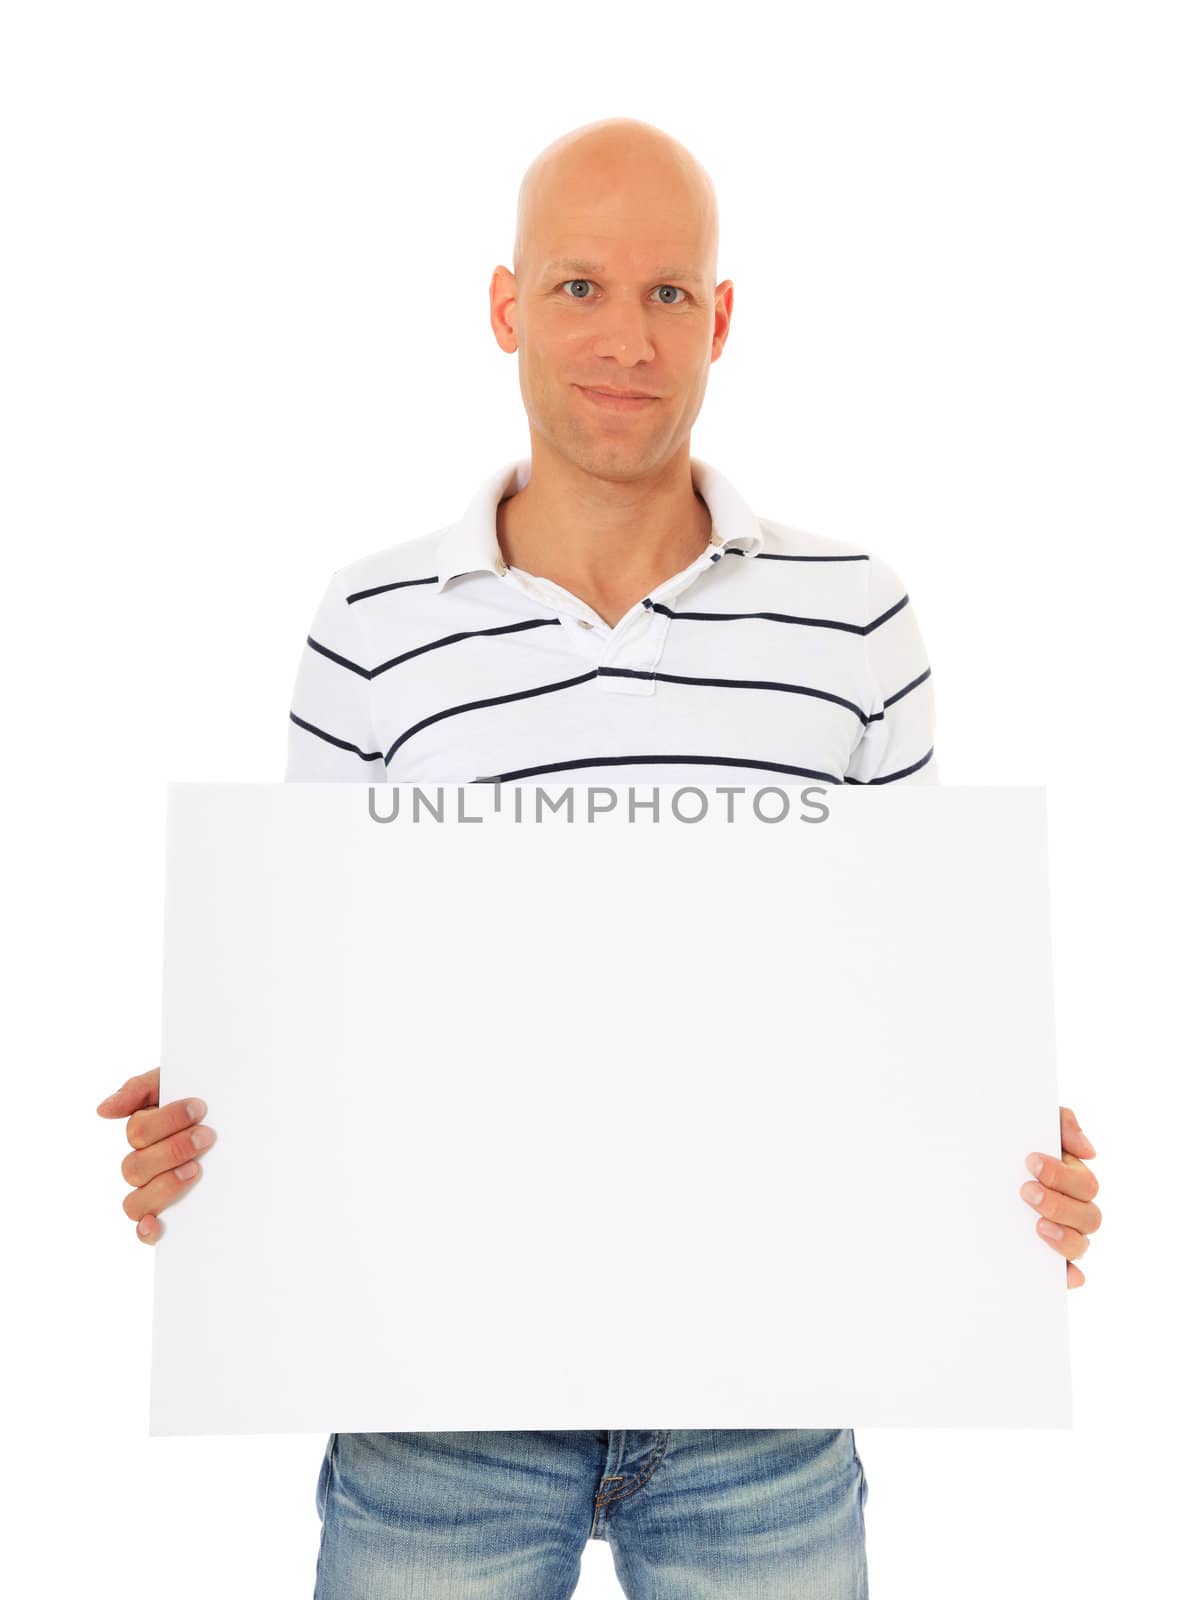 Attractive man holding blank white sign. All on white background.